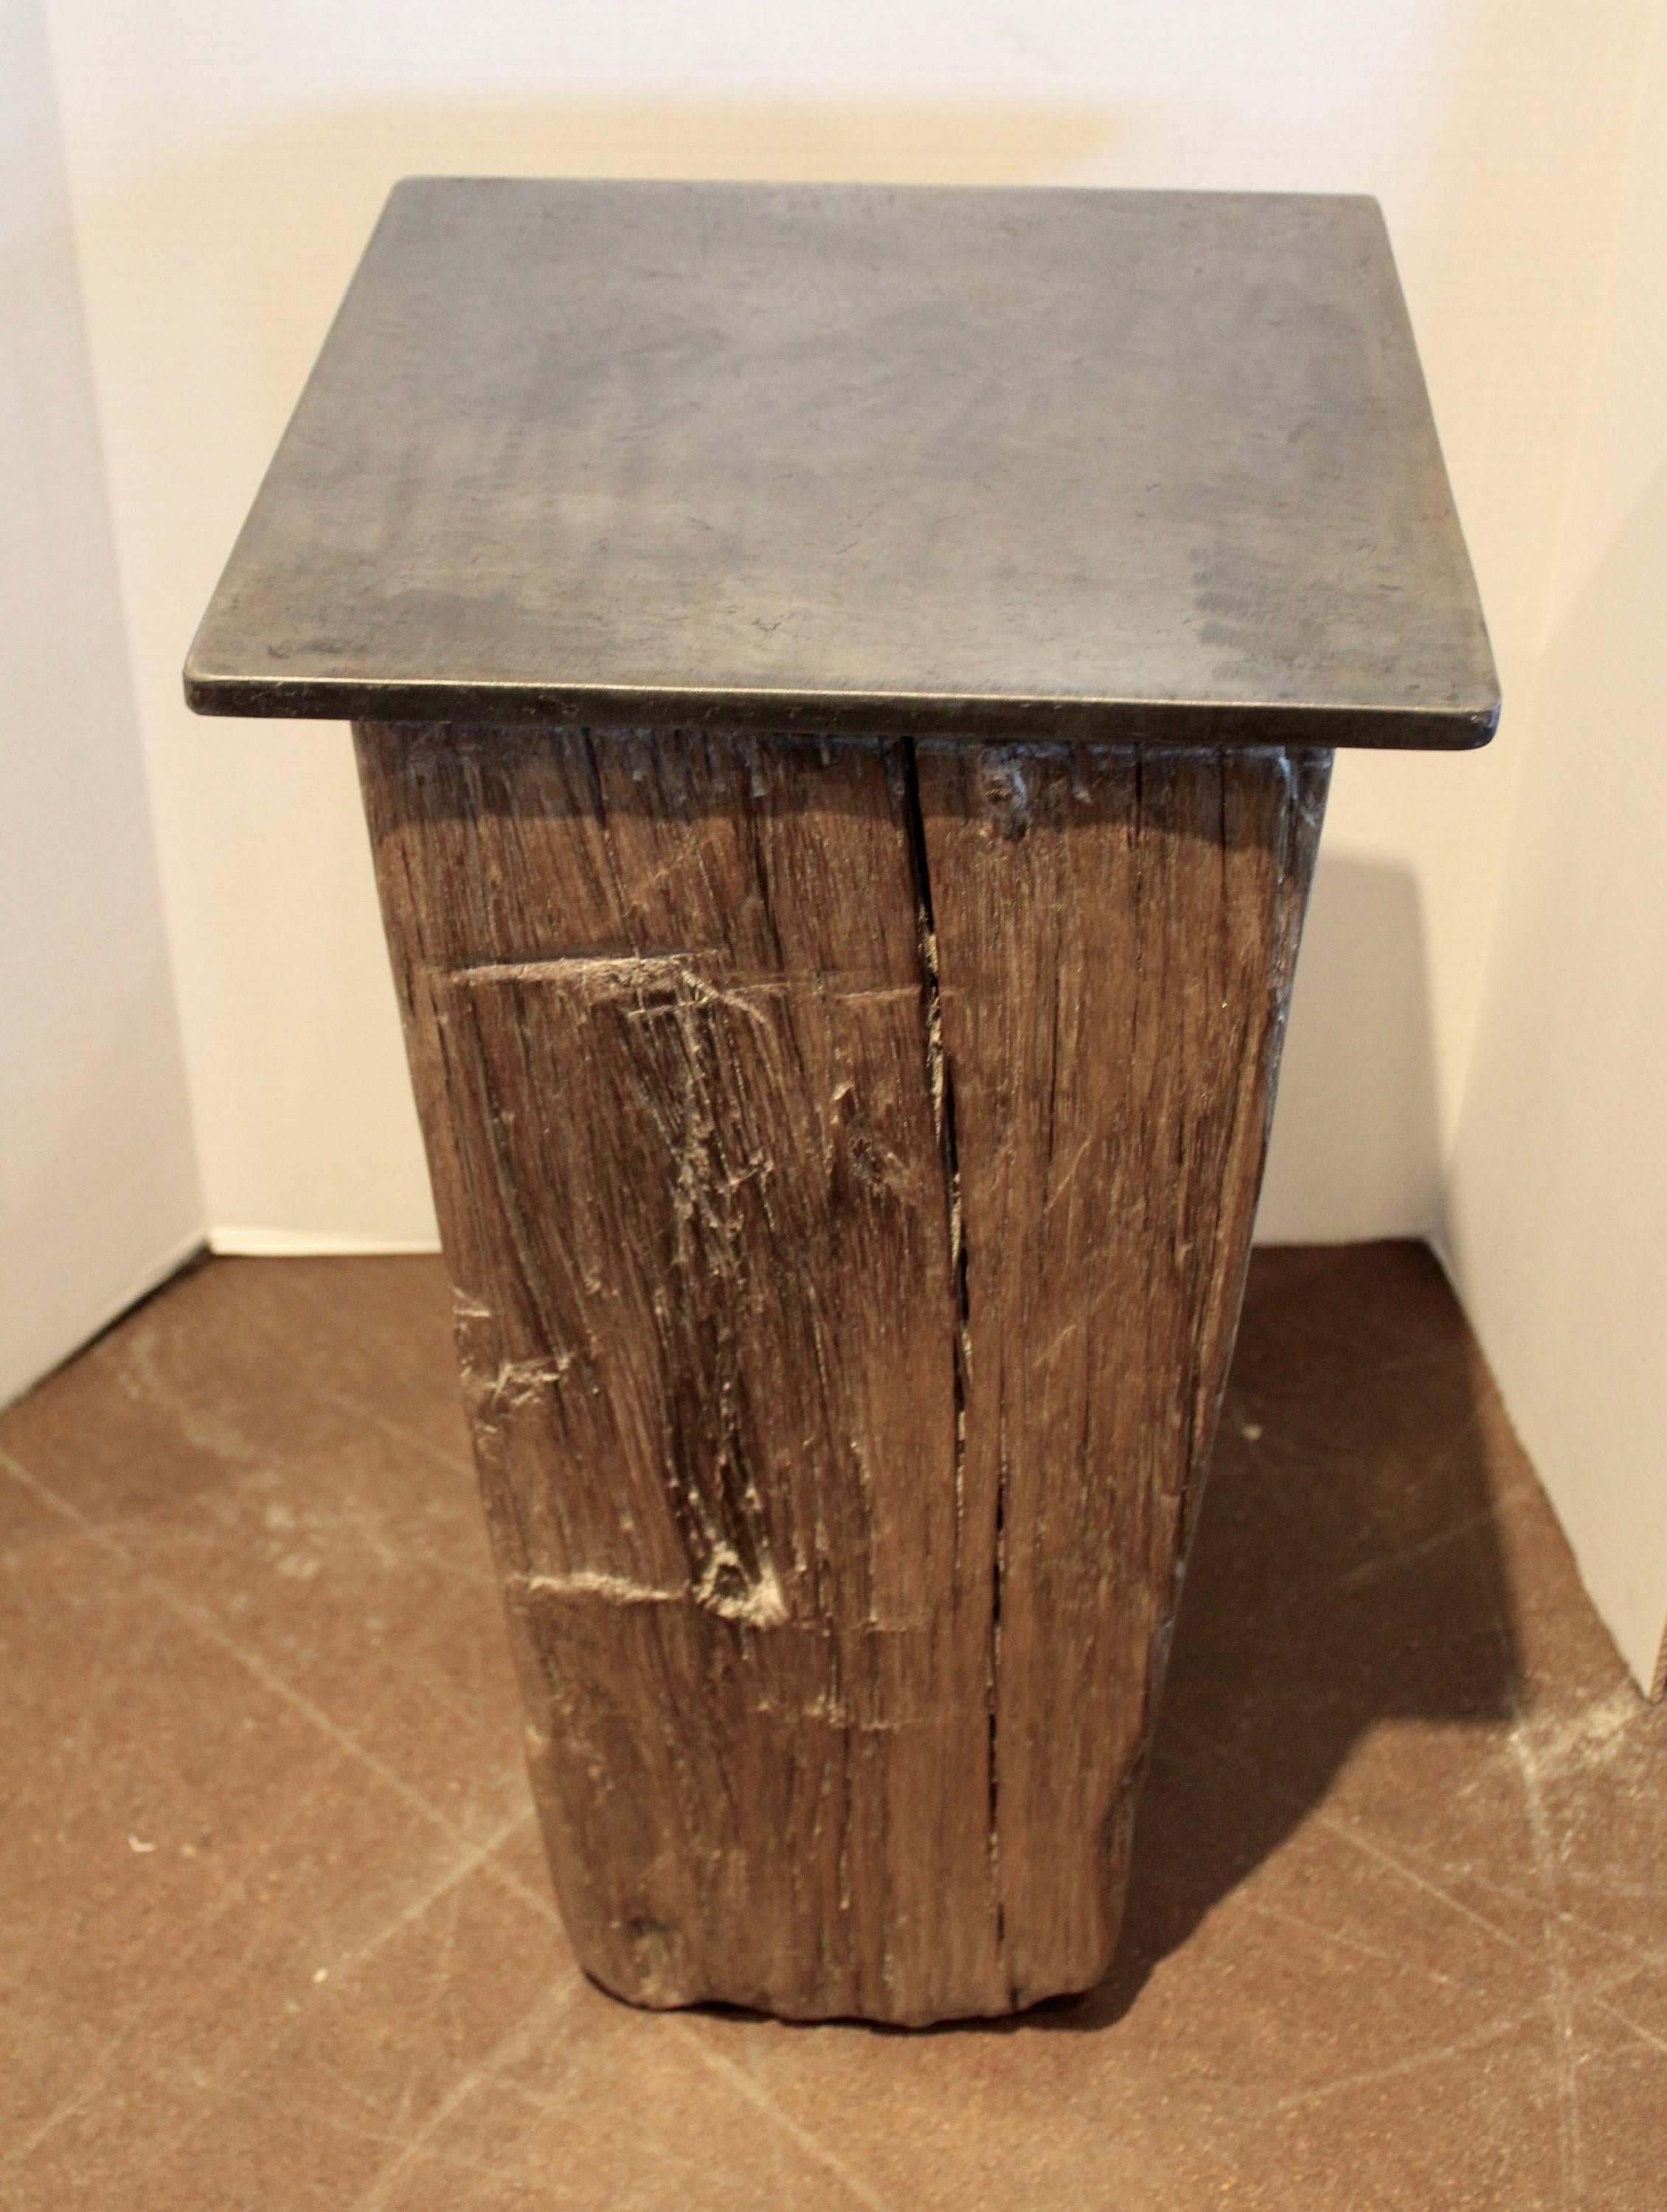 Dutch teak side table.
Antique dutch canal block of teak wood with steel base top. 
Teakwood. 
Can be used indoor or outdoor in covered area. 

 